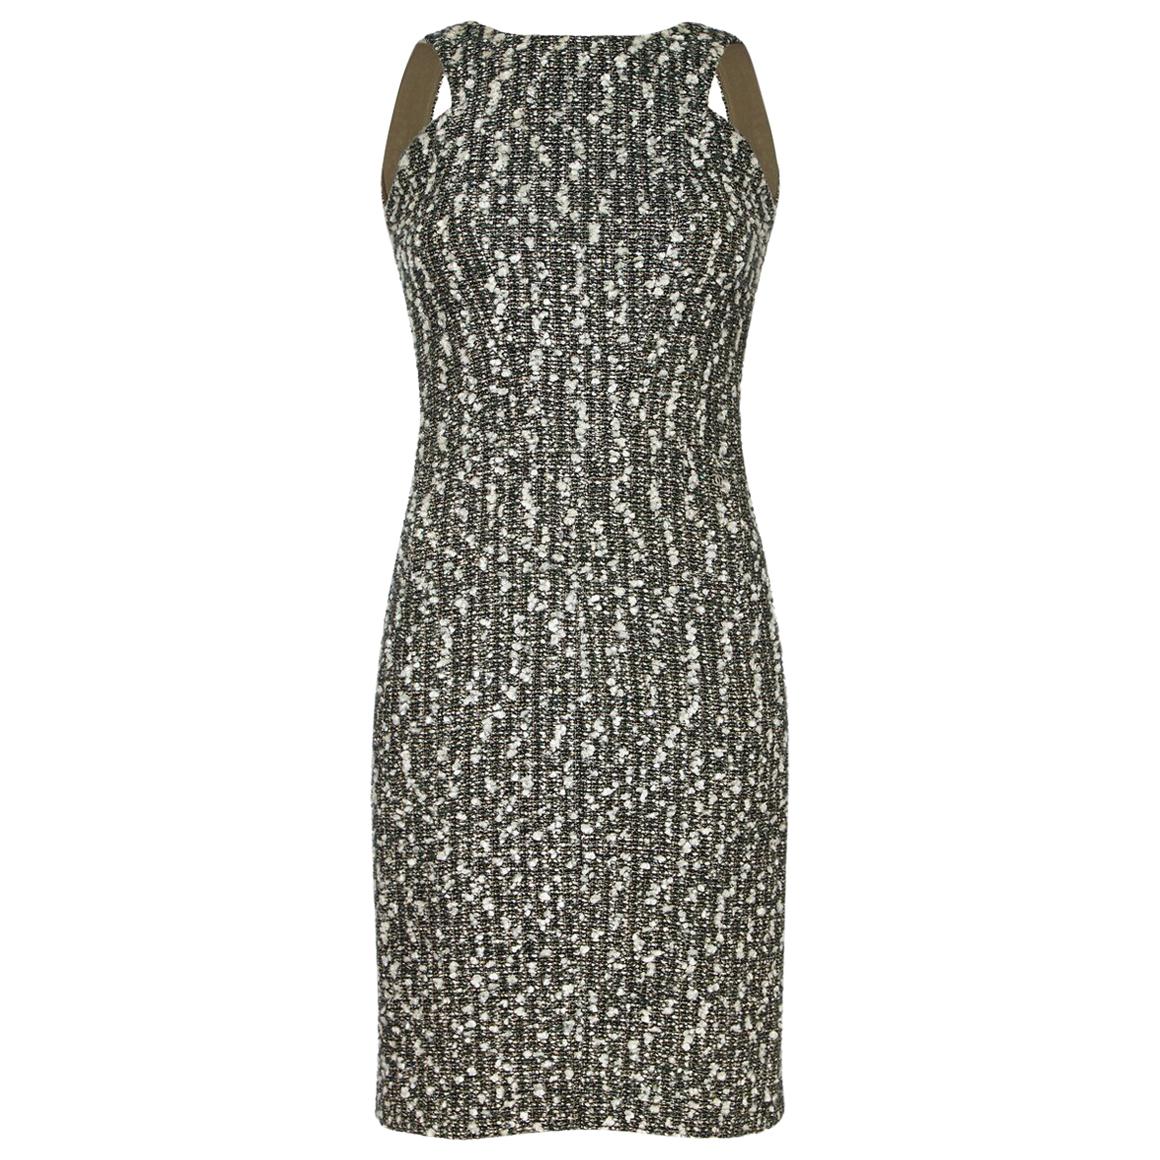 Chanel Grey and White Fantasy Tweed City Dress, 2004 